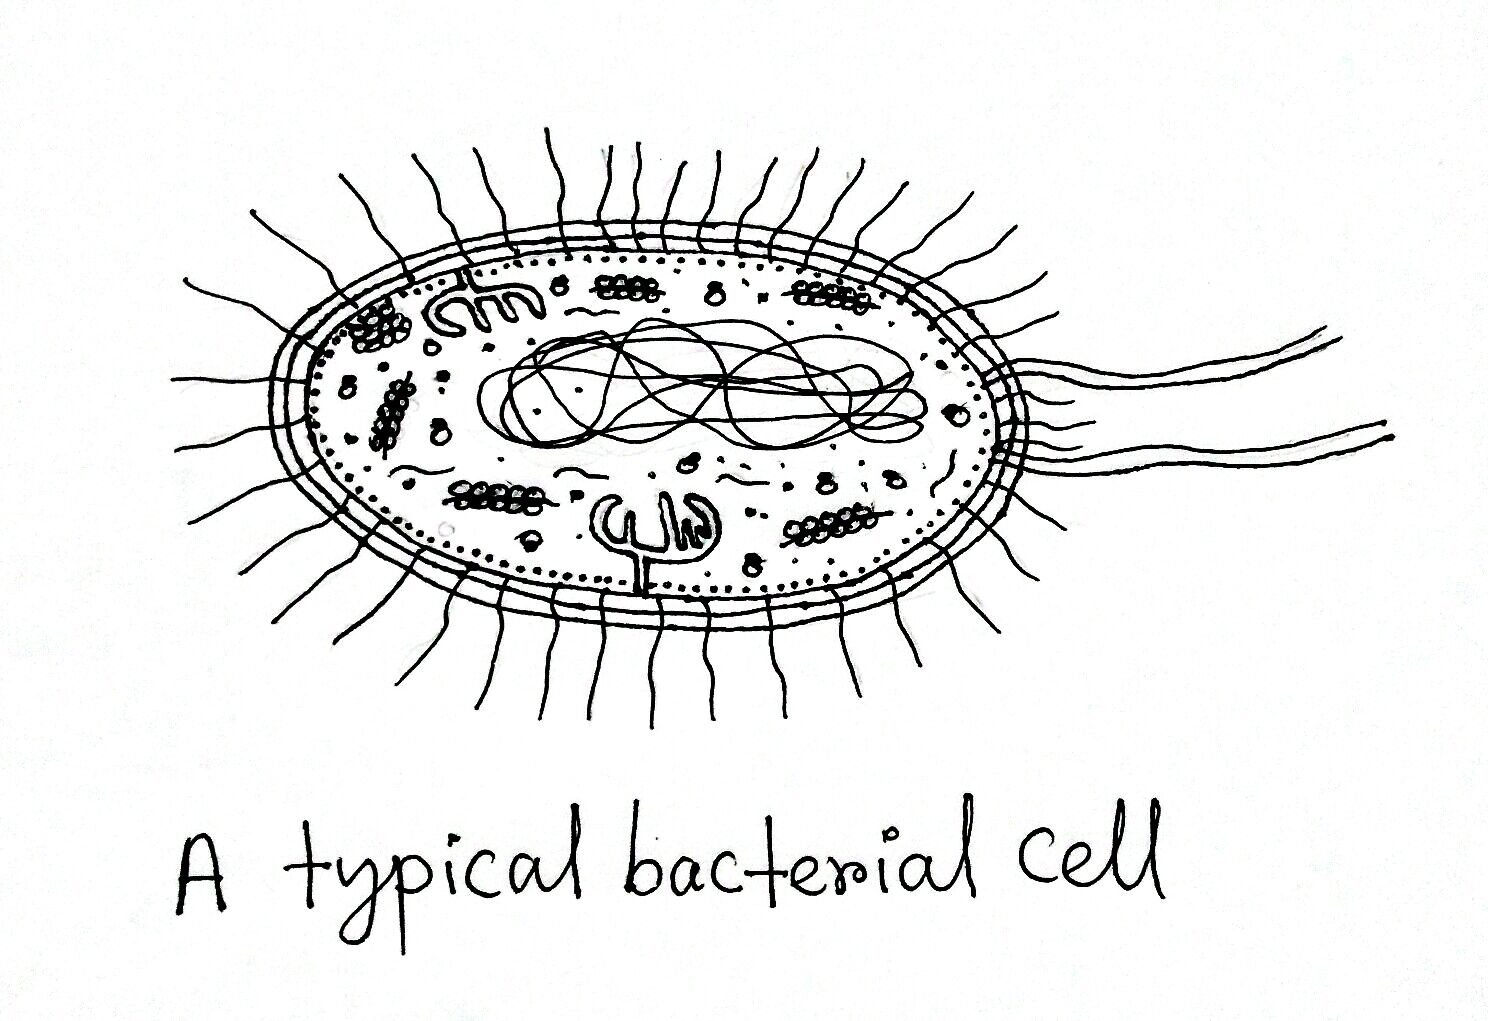 Structure and Function of a Typical Bacterial Cell with Diagram